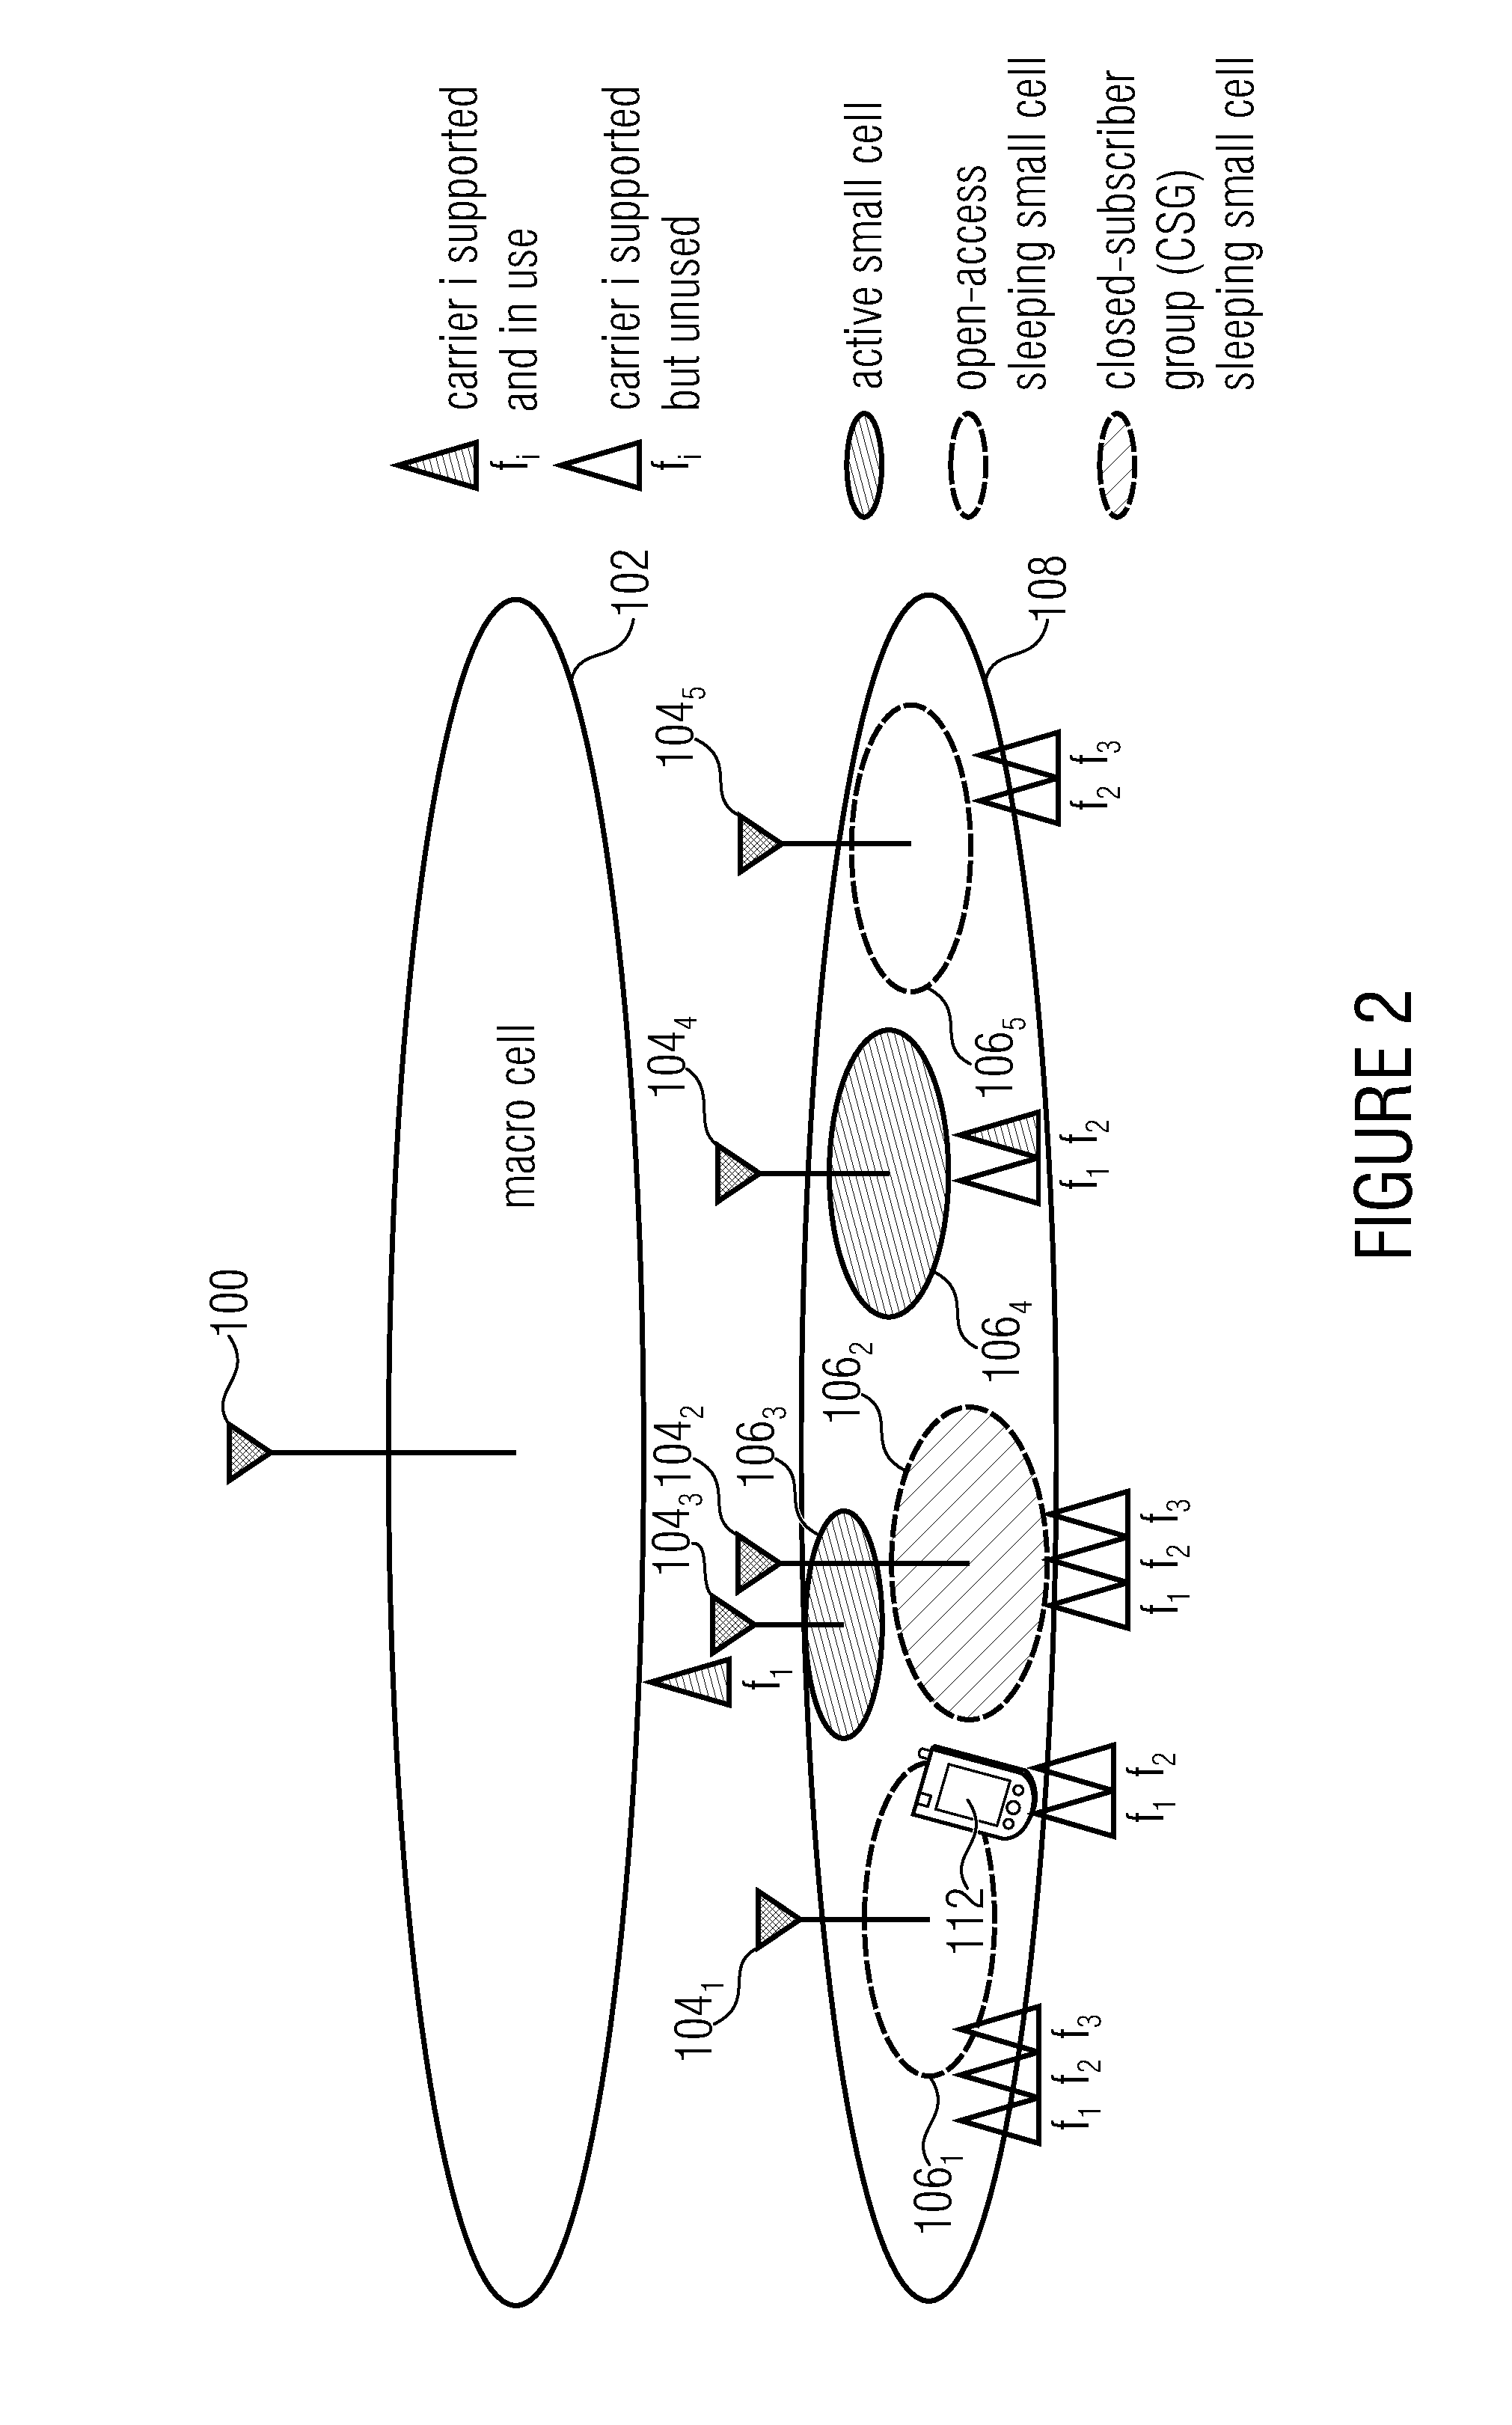 Macro-cell assisted small cell discovery and activation